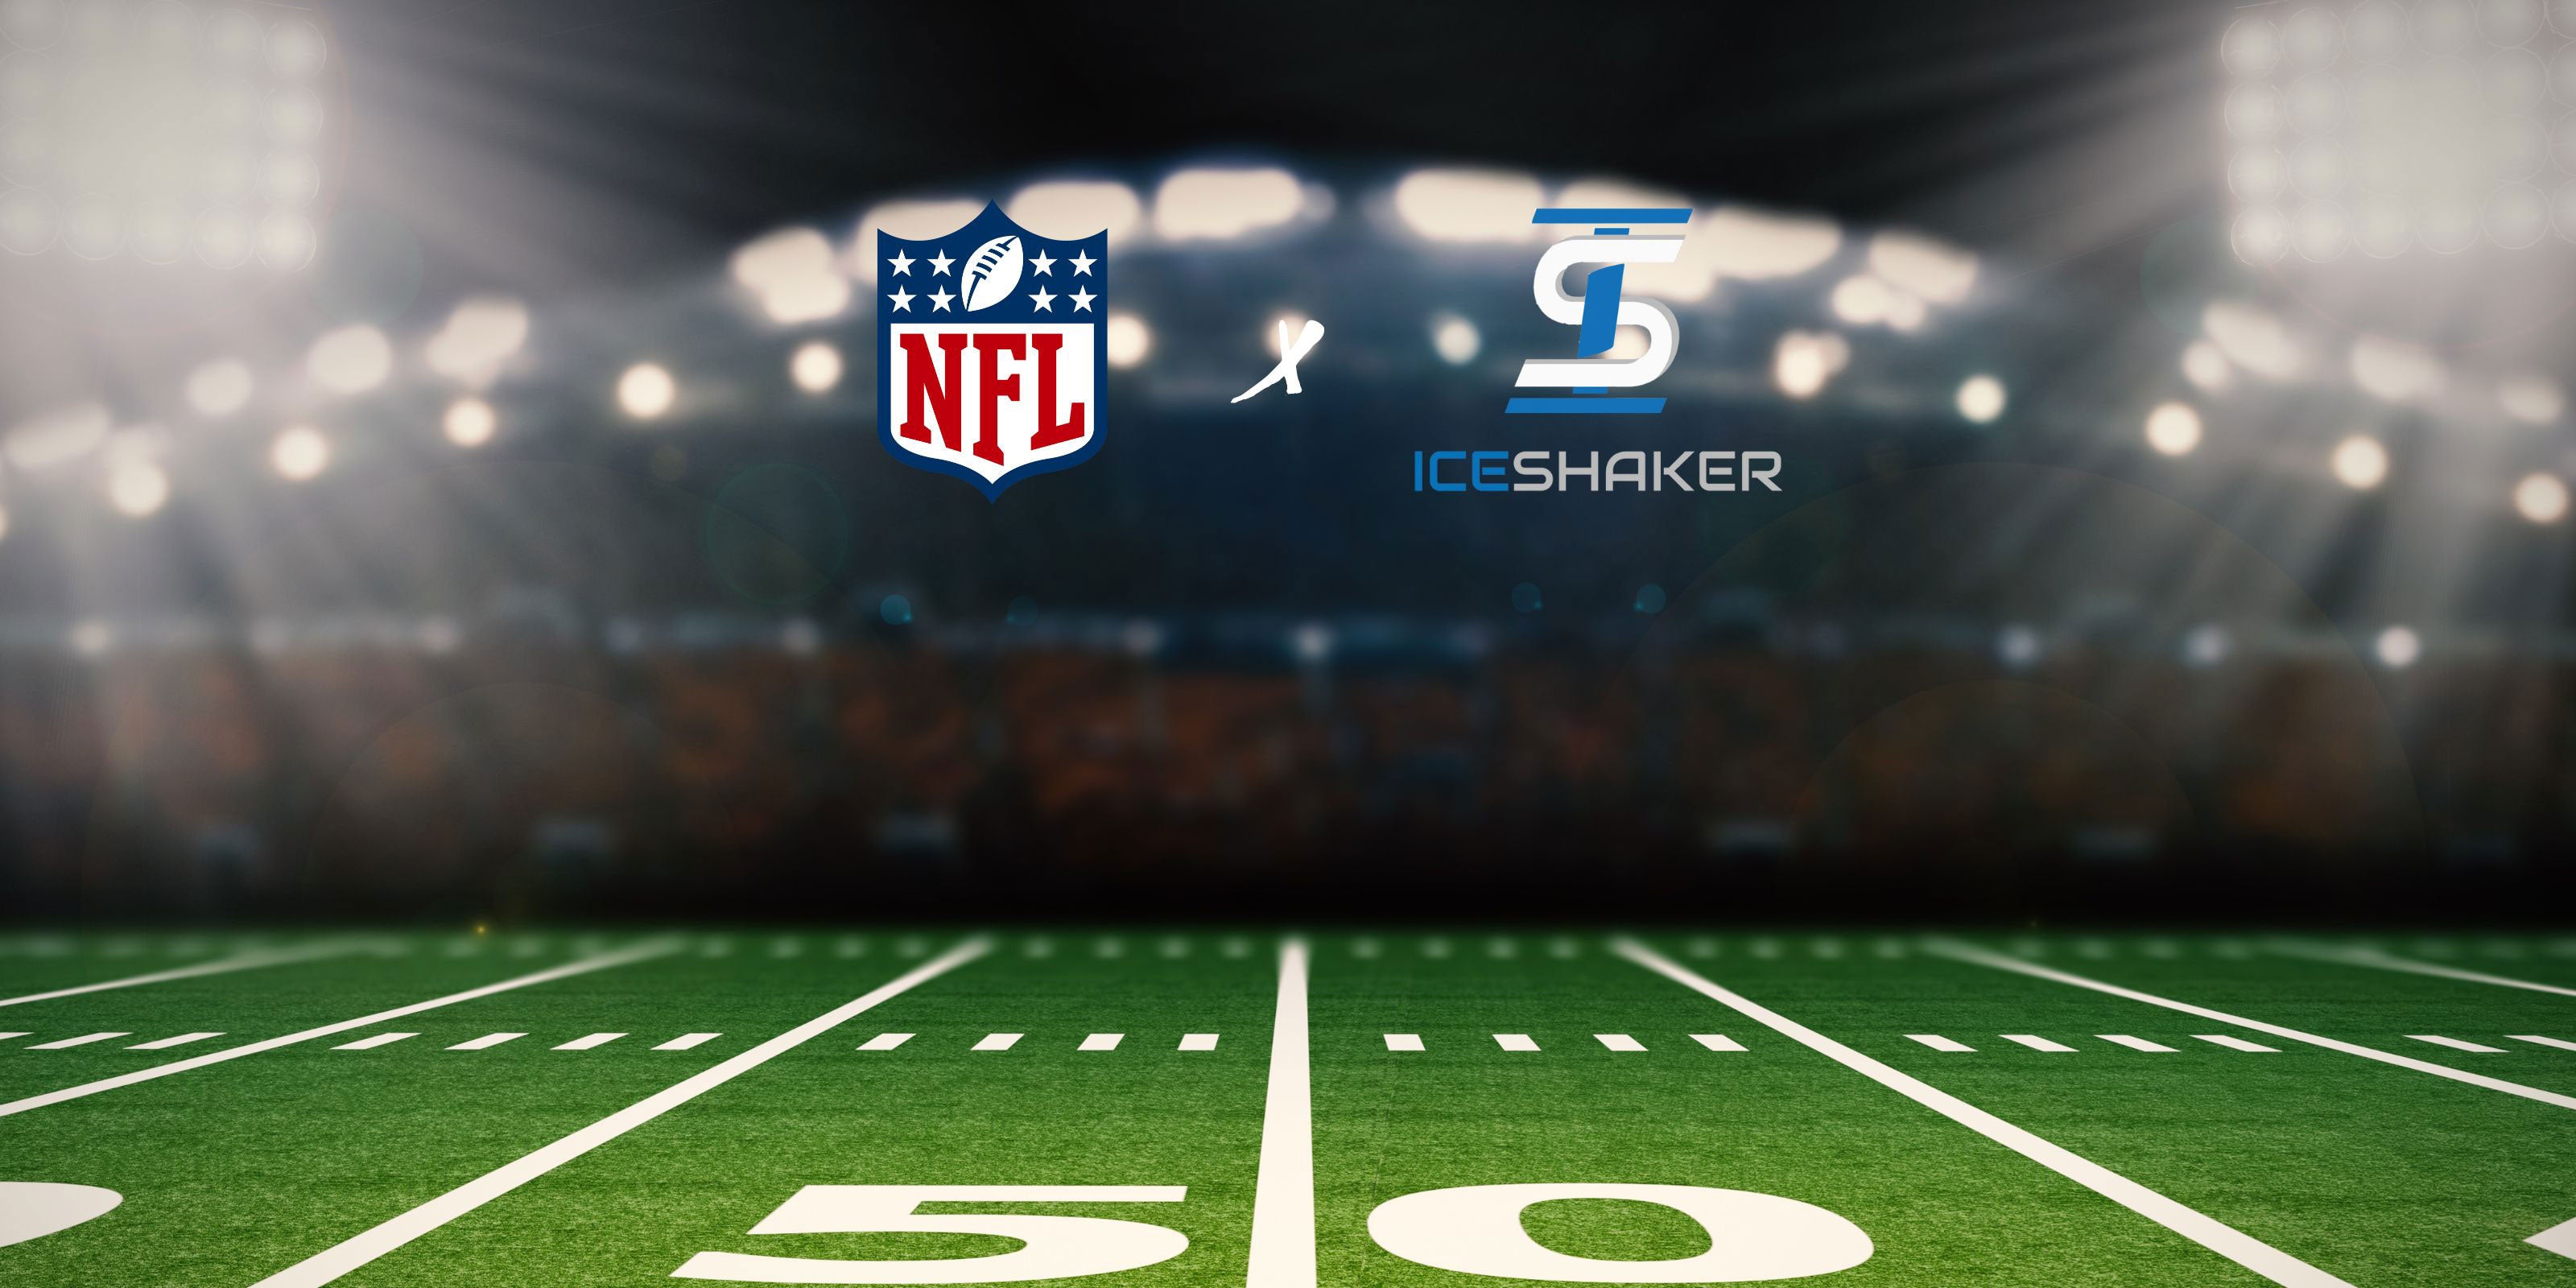 An image of a football field from the 50-yard line with the Official NFL logo and Ice Shaker logo at the top